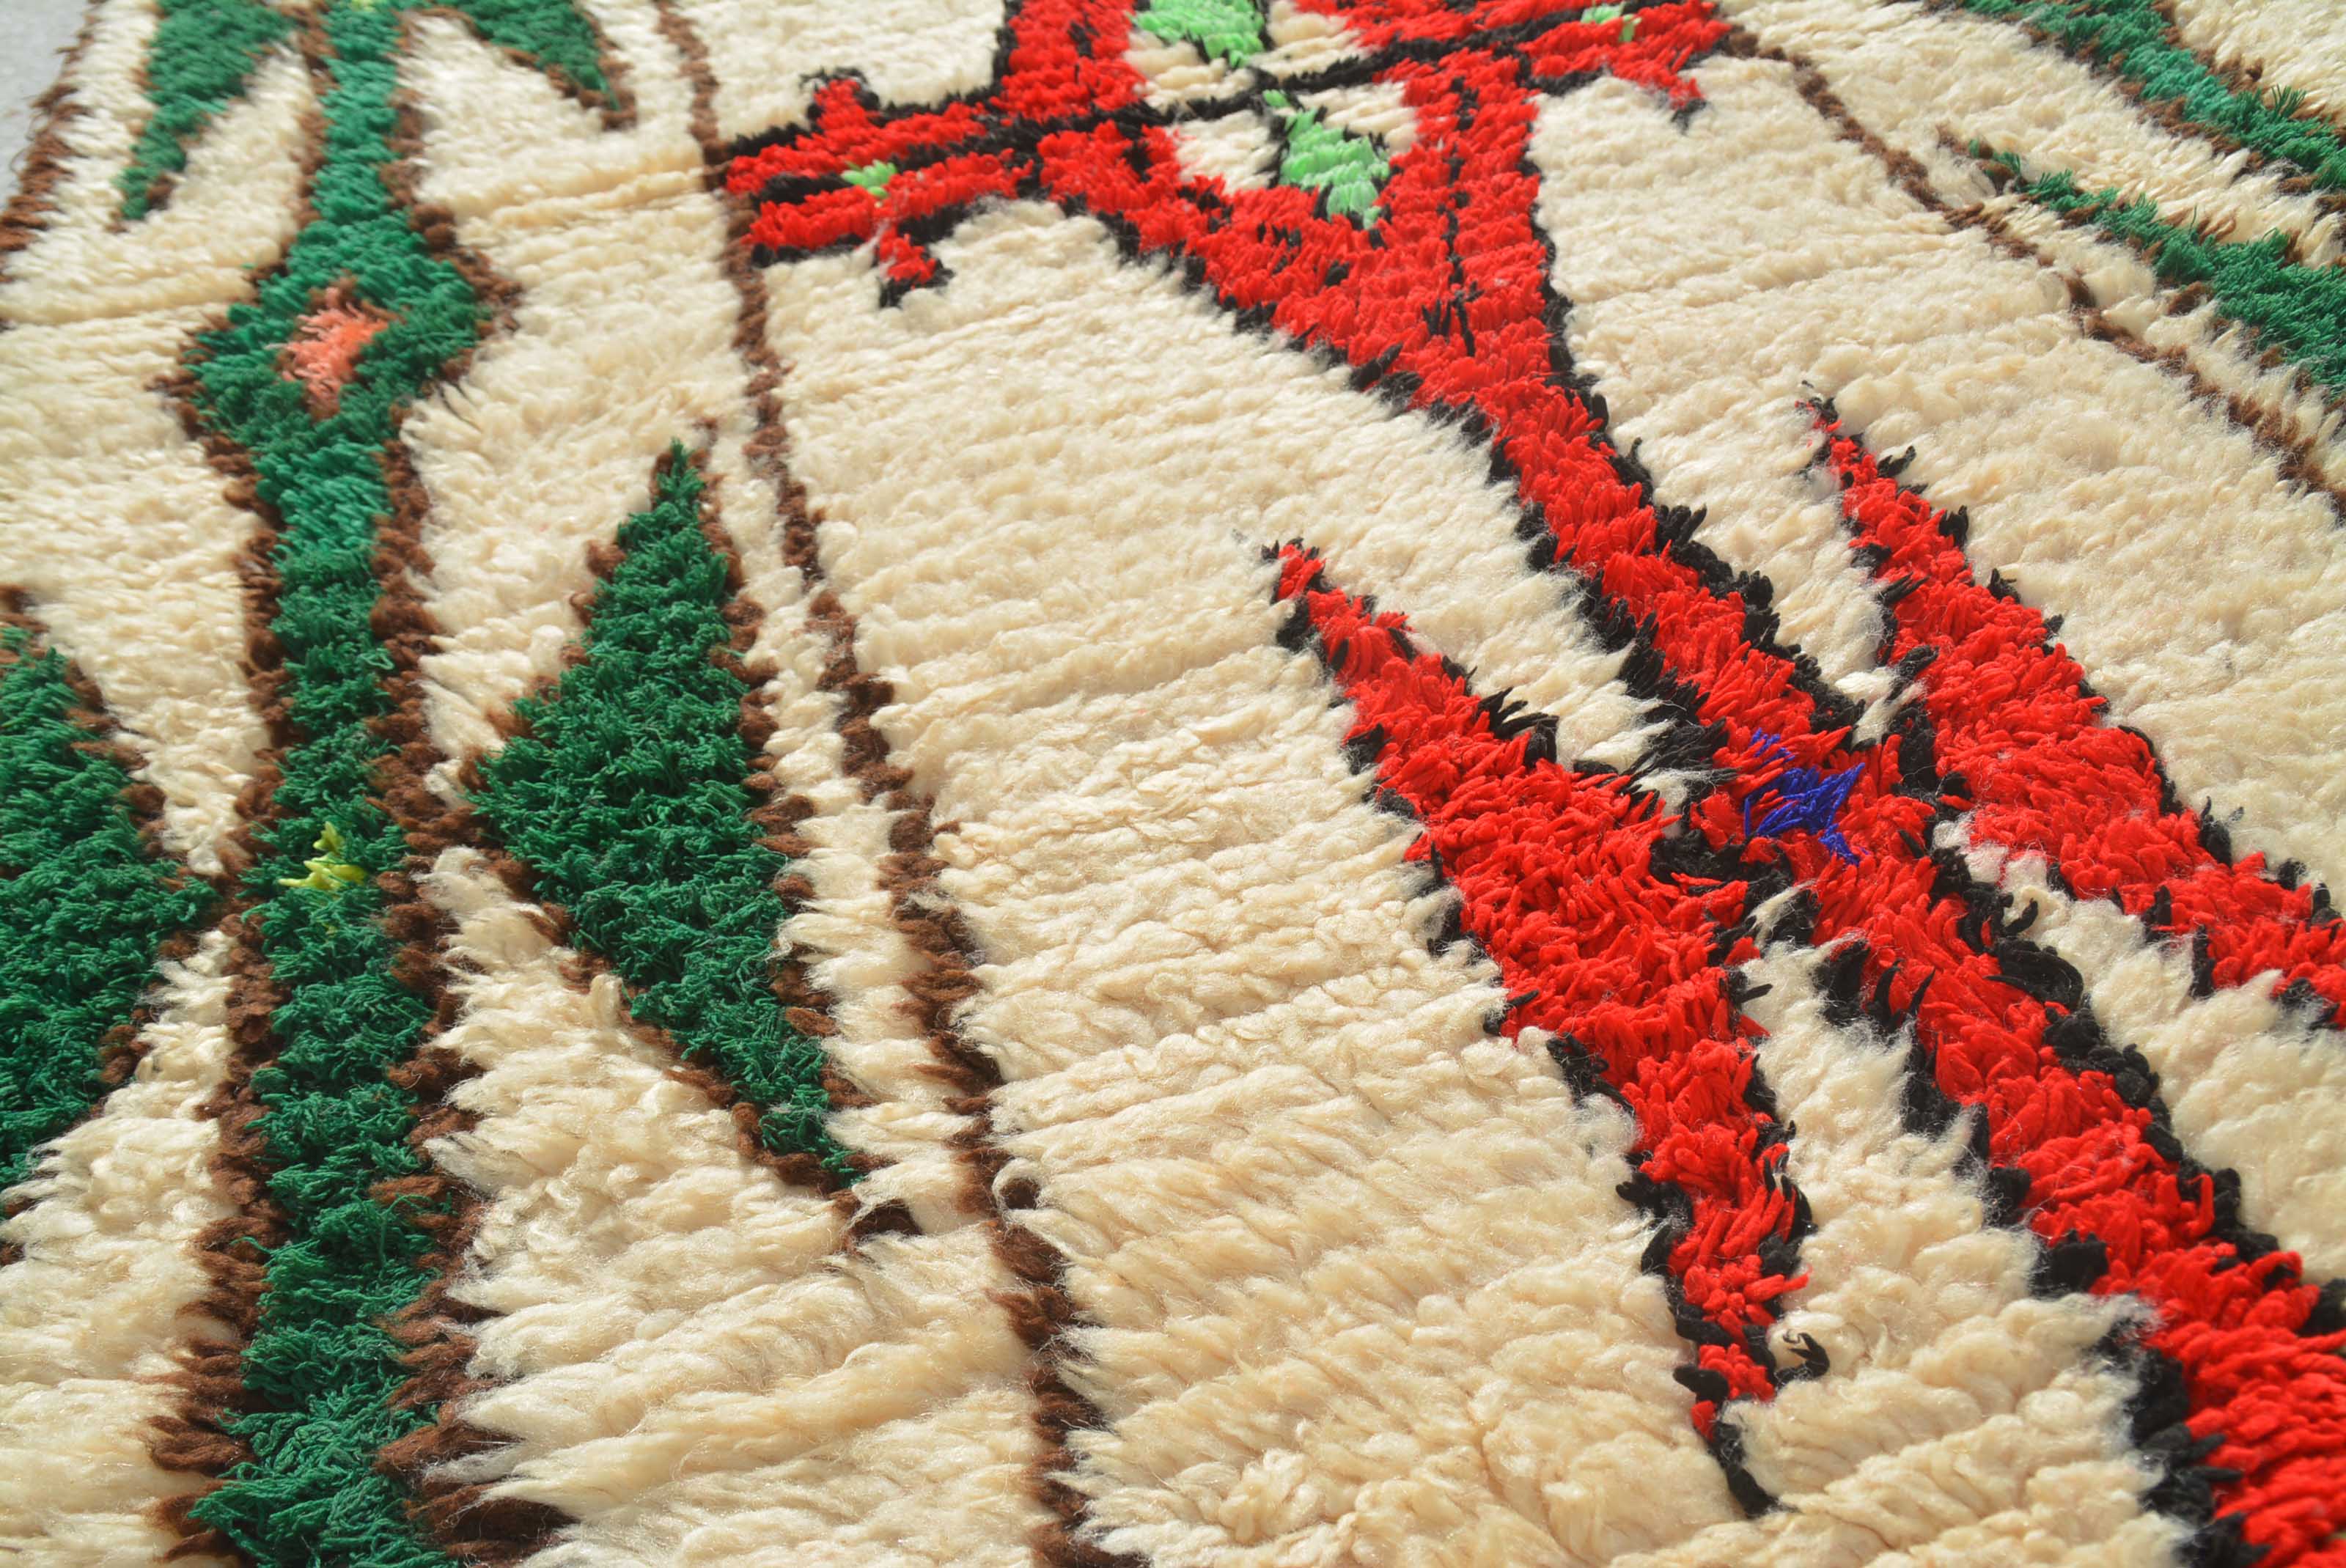 Vintage Moroccan Rug Red And Green Rug | Vintage Moroccan Rug illuminate collective 